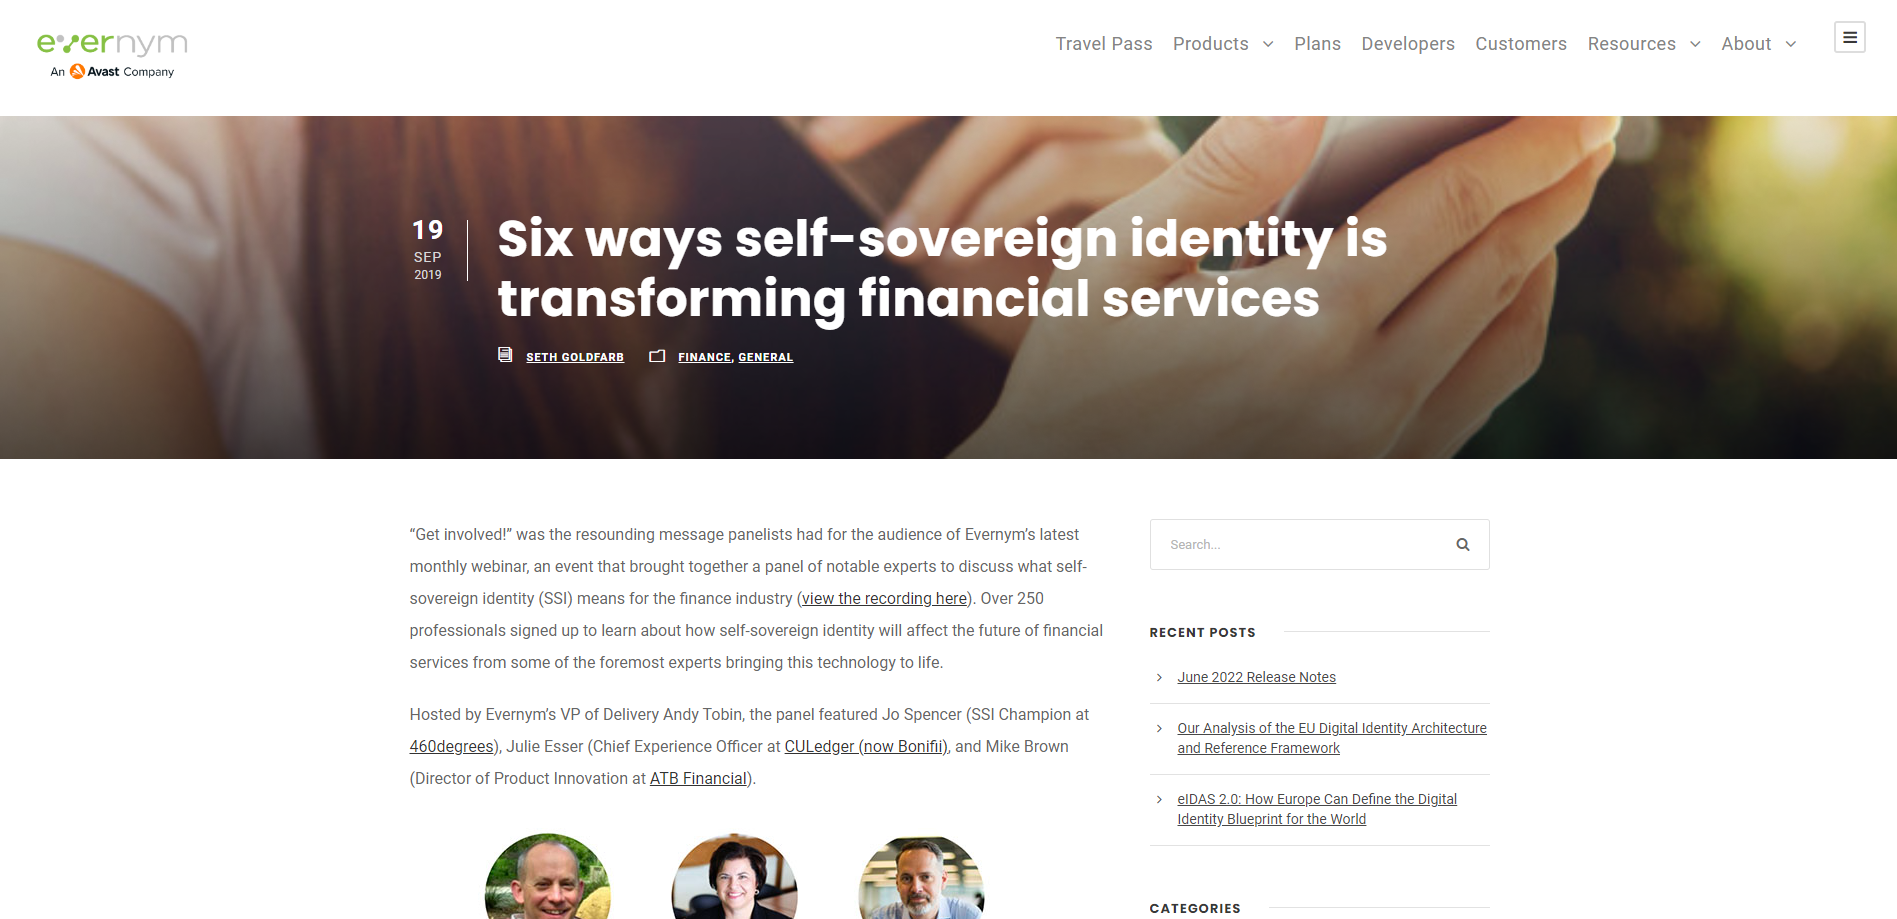 Six ways self-sovereign identity is transforming financial services